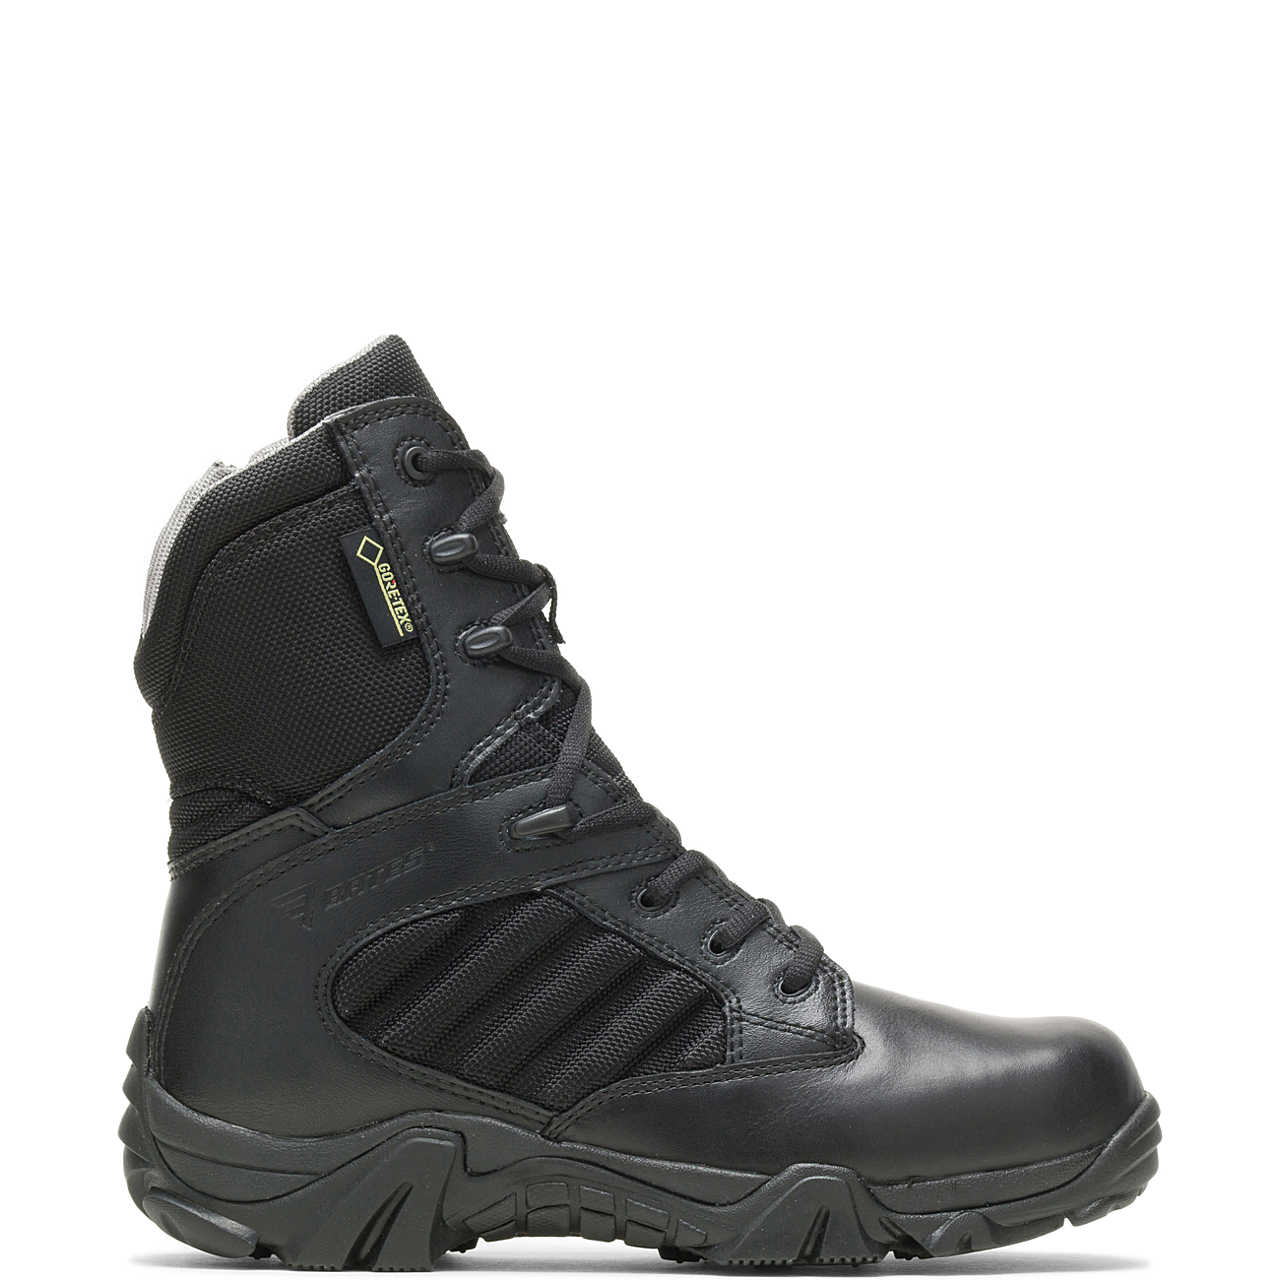 GX-8 Side Zip Boot with GORE-TEX® - Tactical | Wolverine Footwear